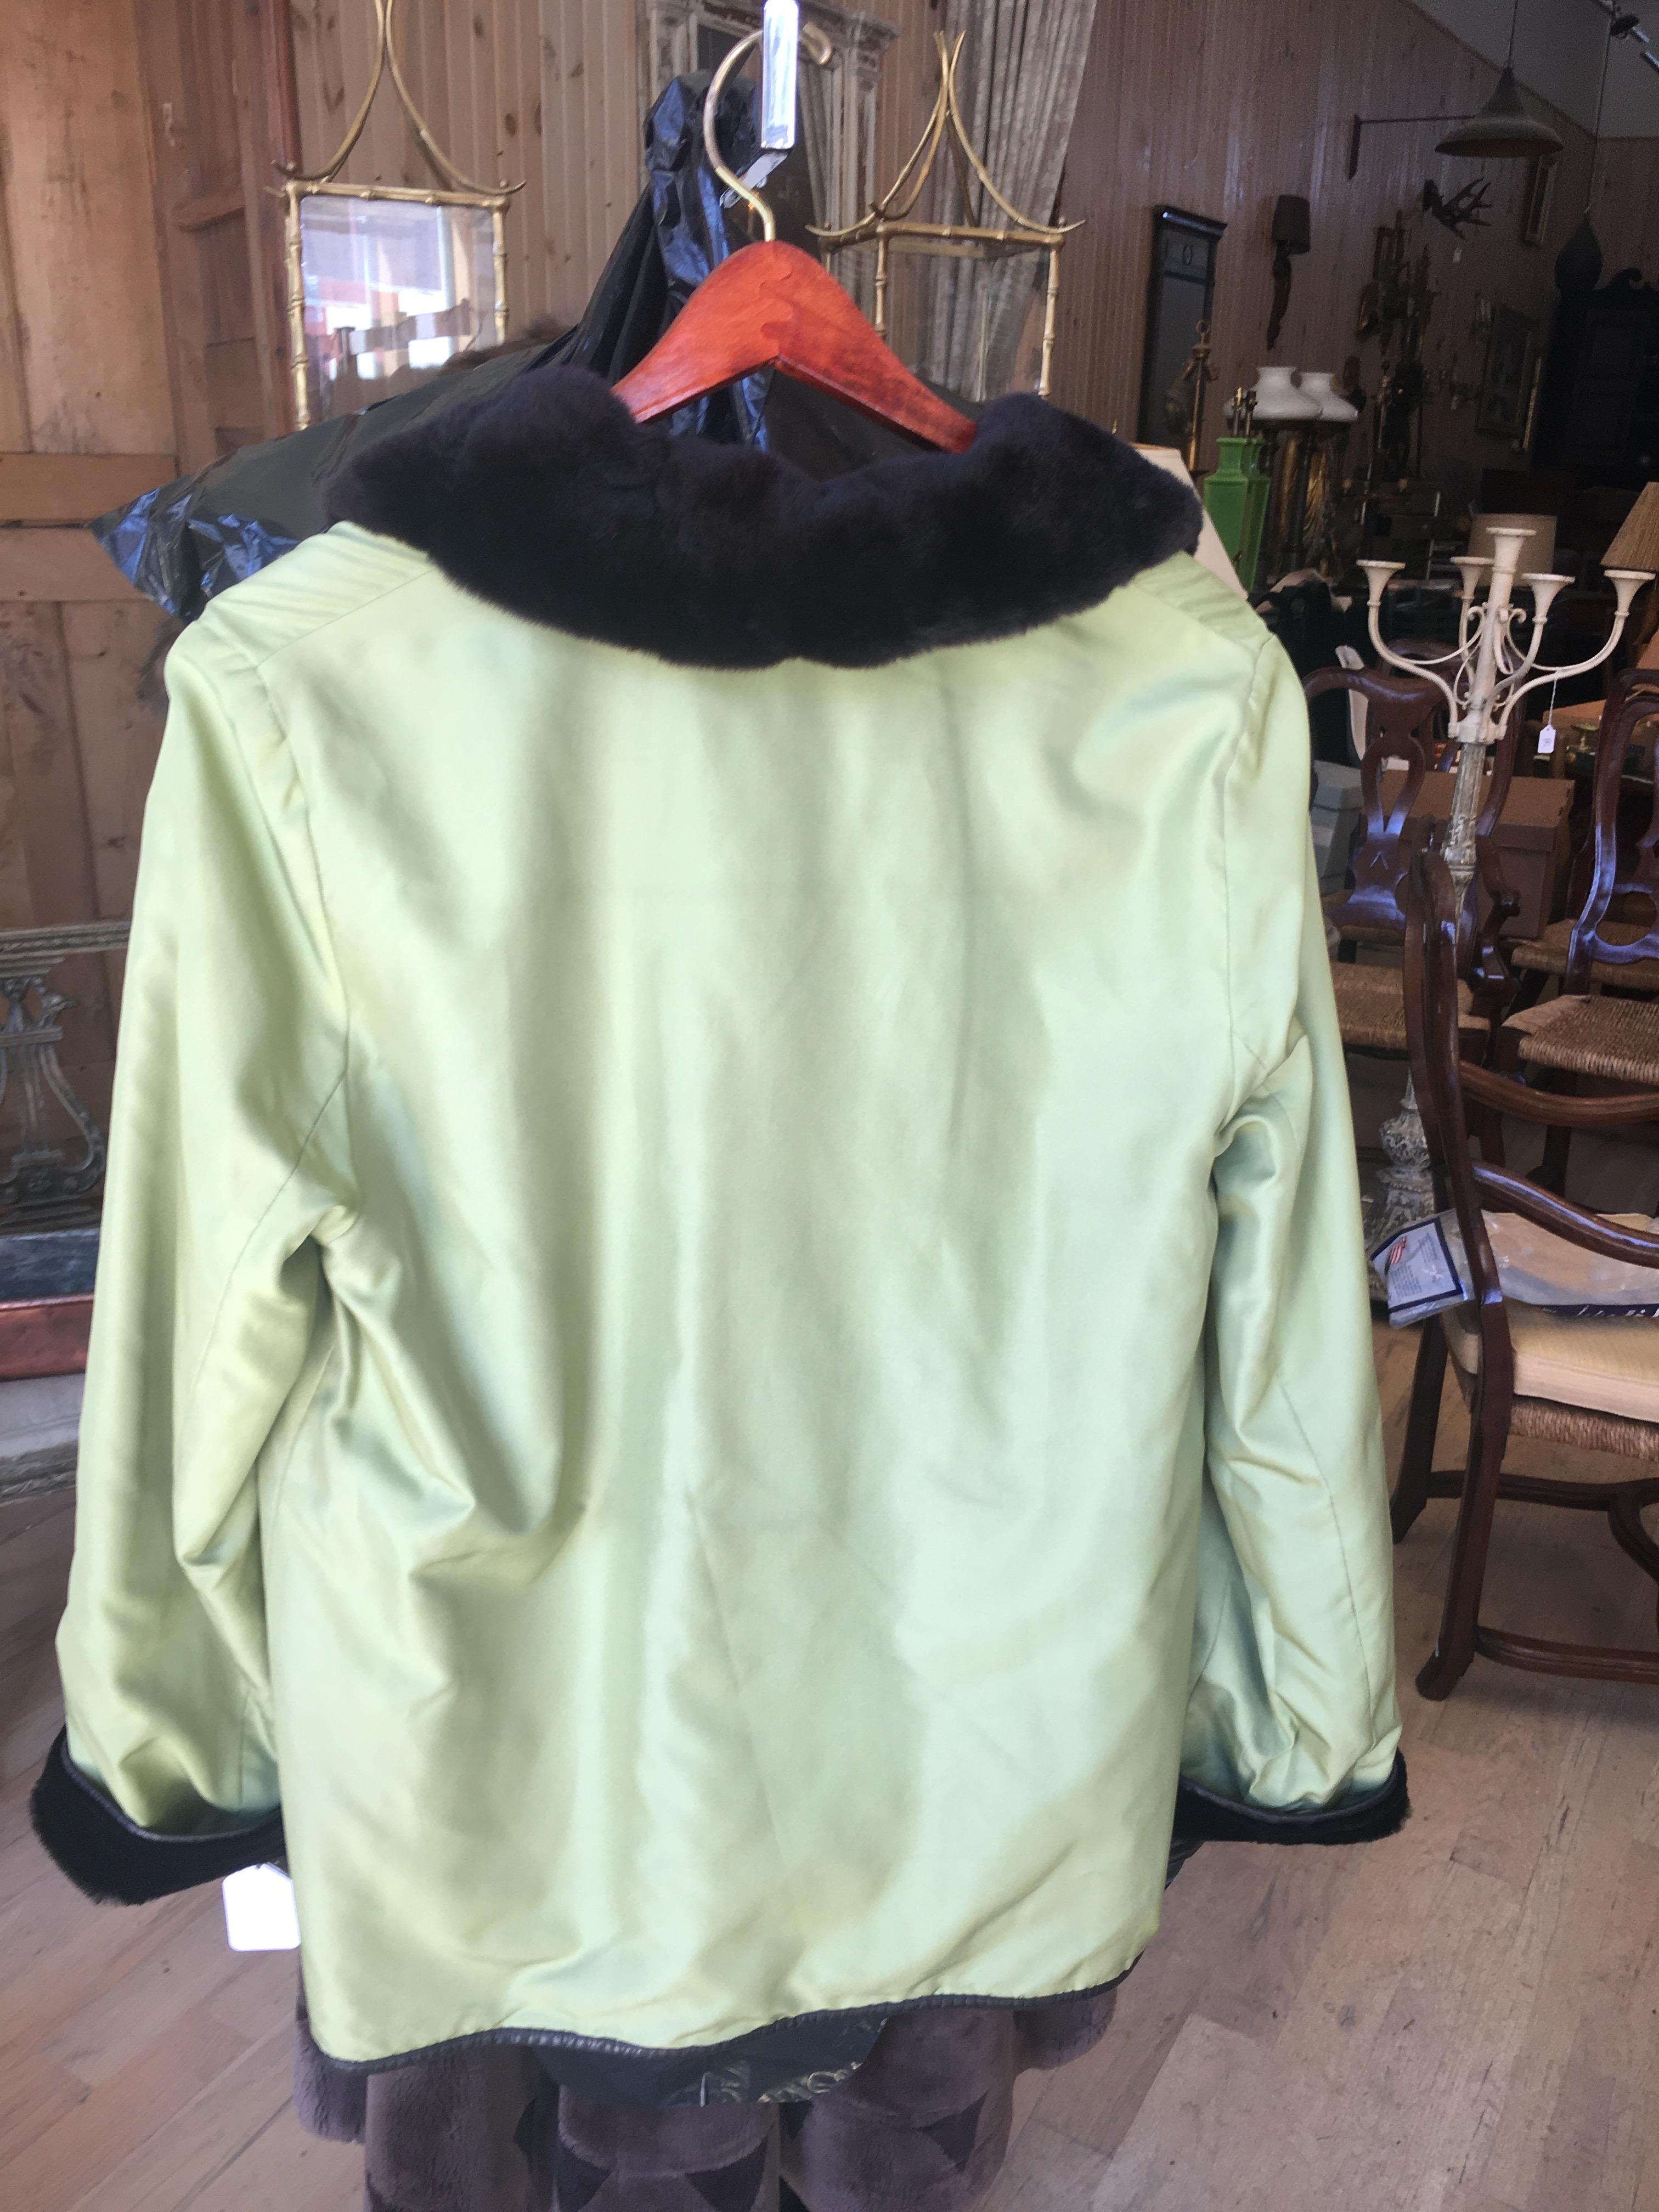 Very Chic Reversible Green Nylon, Black Leather and Sheared Rabbit Coat ...